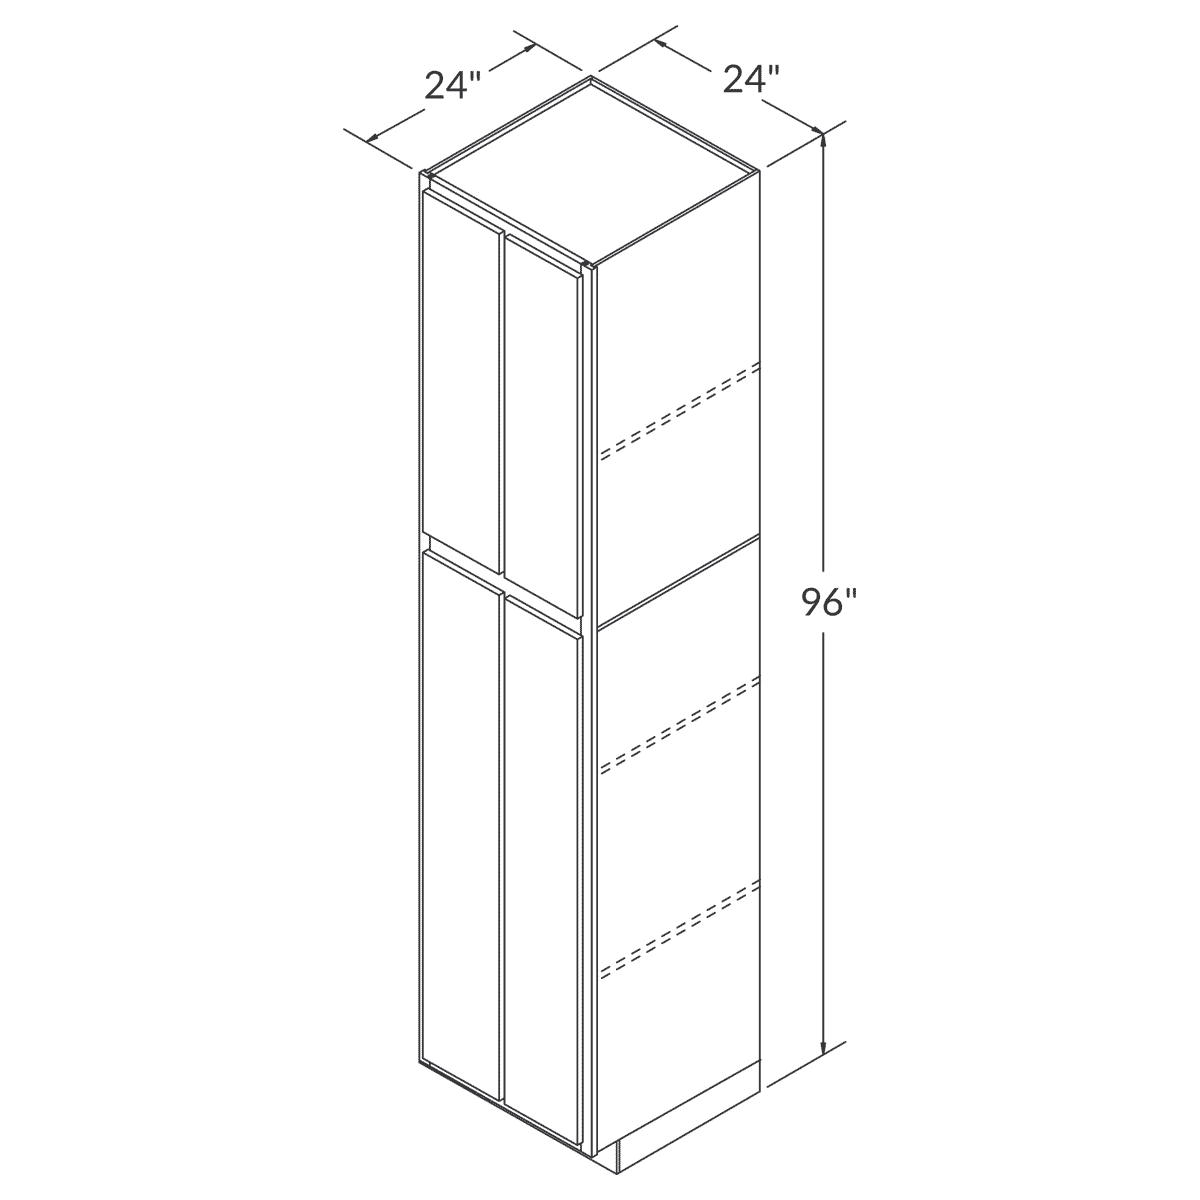 Cubitac Prestige Dover Latte Tall Pantry 24"W x 96"H Assembled Cabinet Wireframe